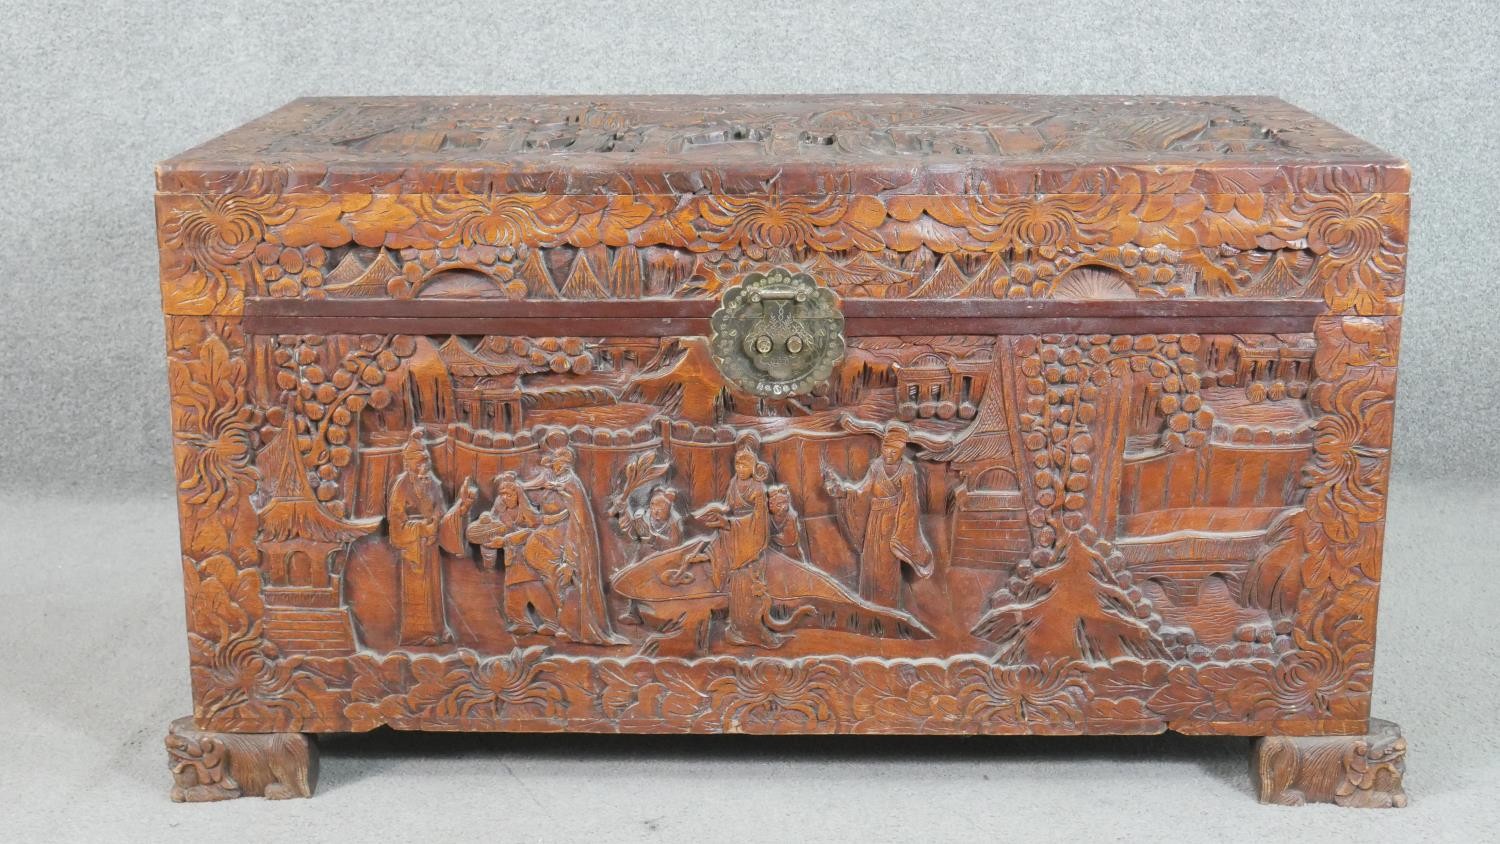 A 20th century Chinese camphorwood coffer, of rectangular form, the lid and sides ornately carved